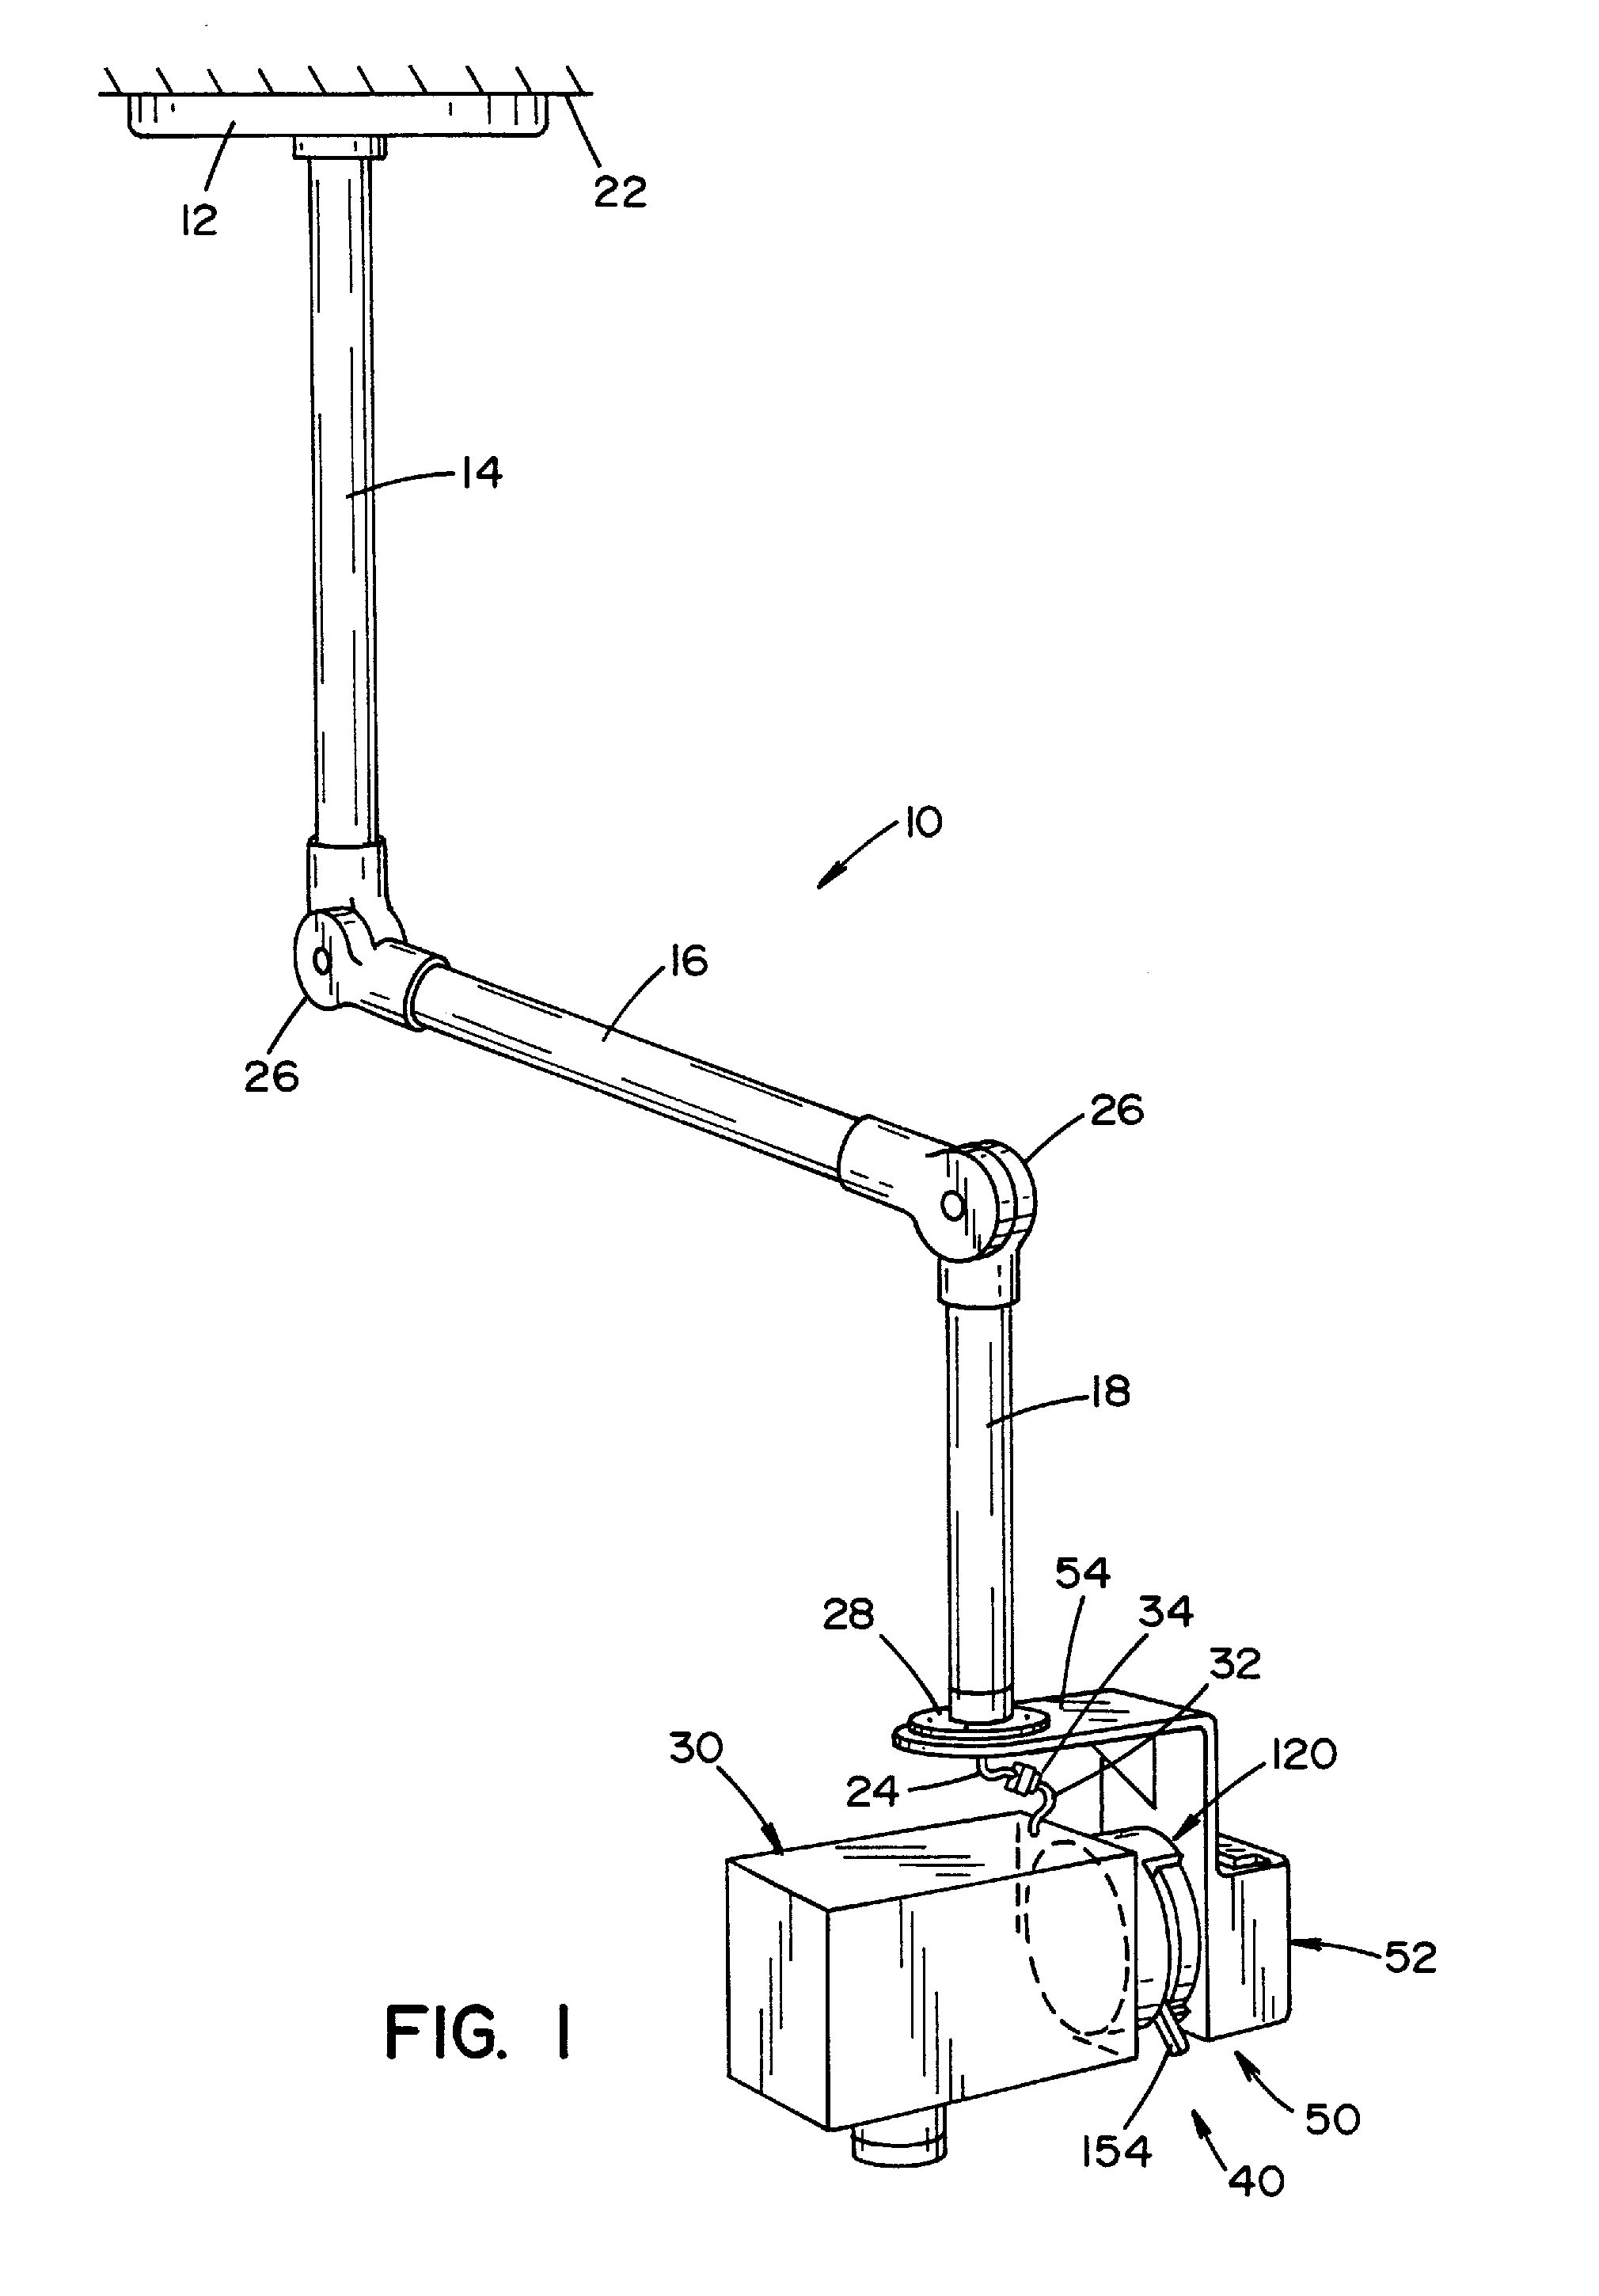 Connection system for mounting a device onto a support arm